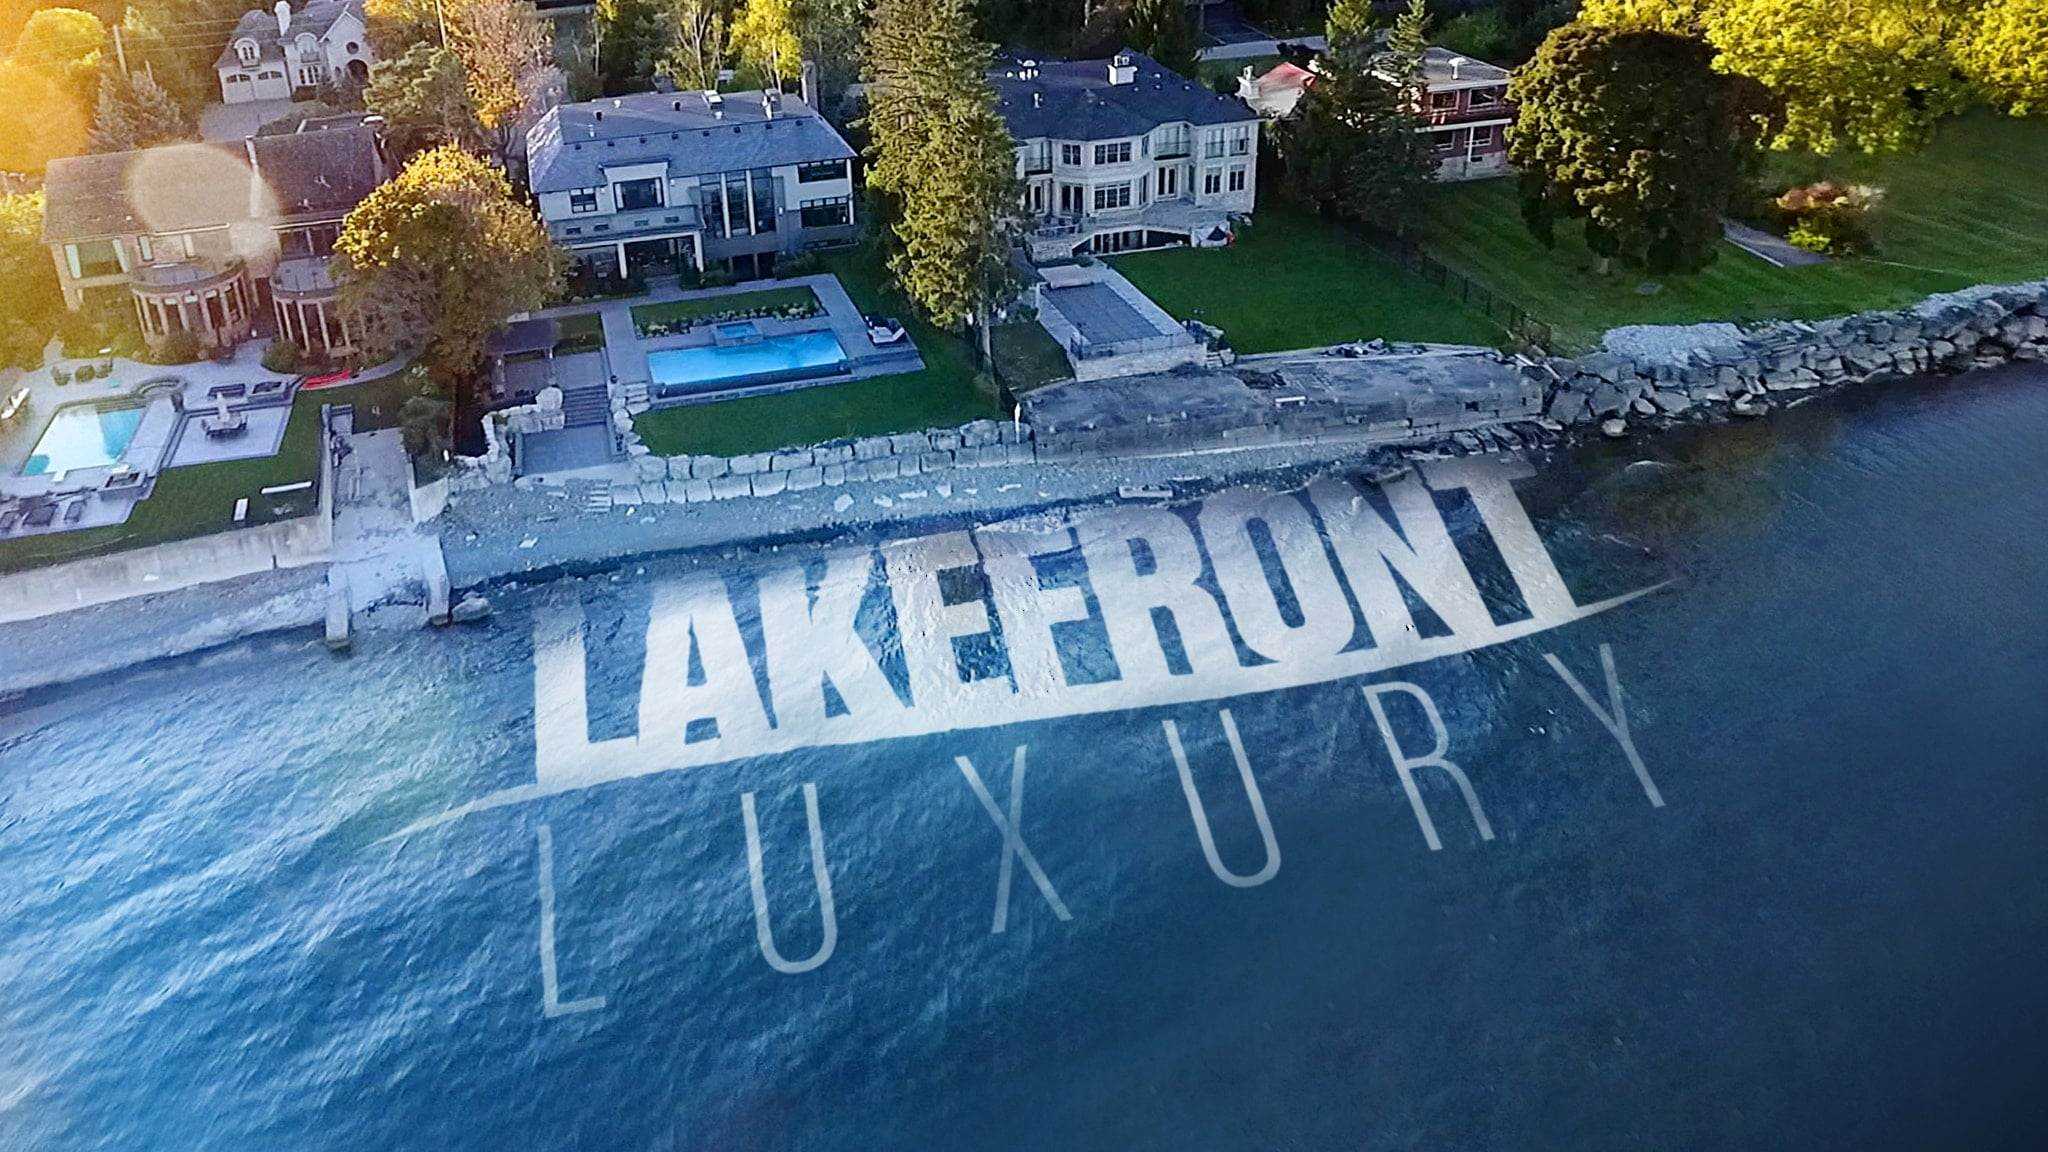 Poster of the show, Lakefront Luxury